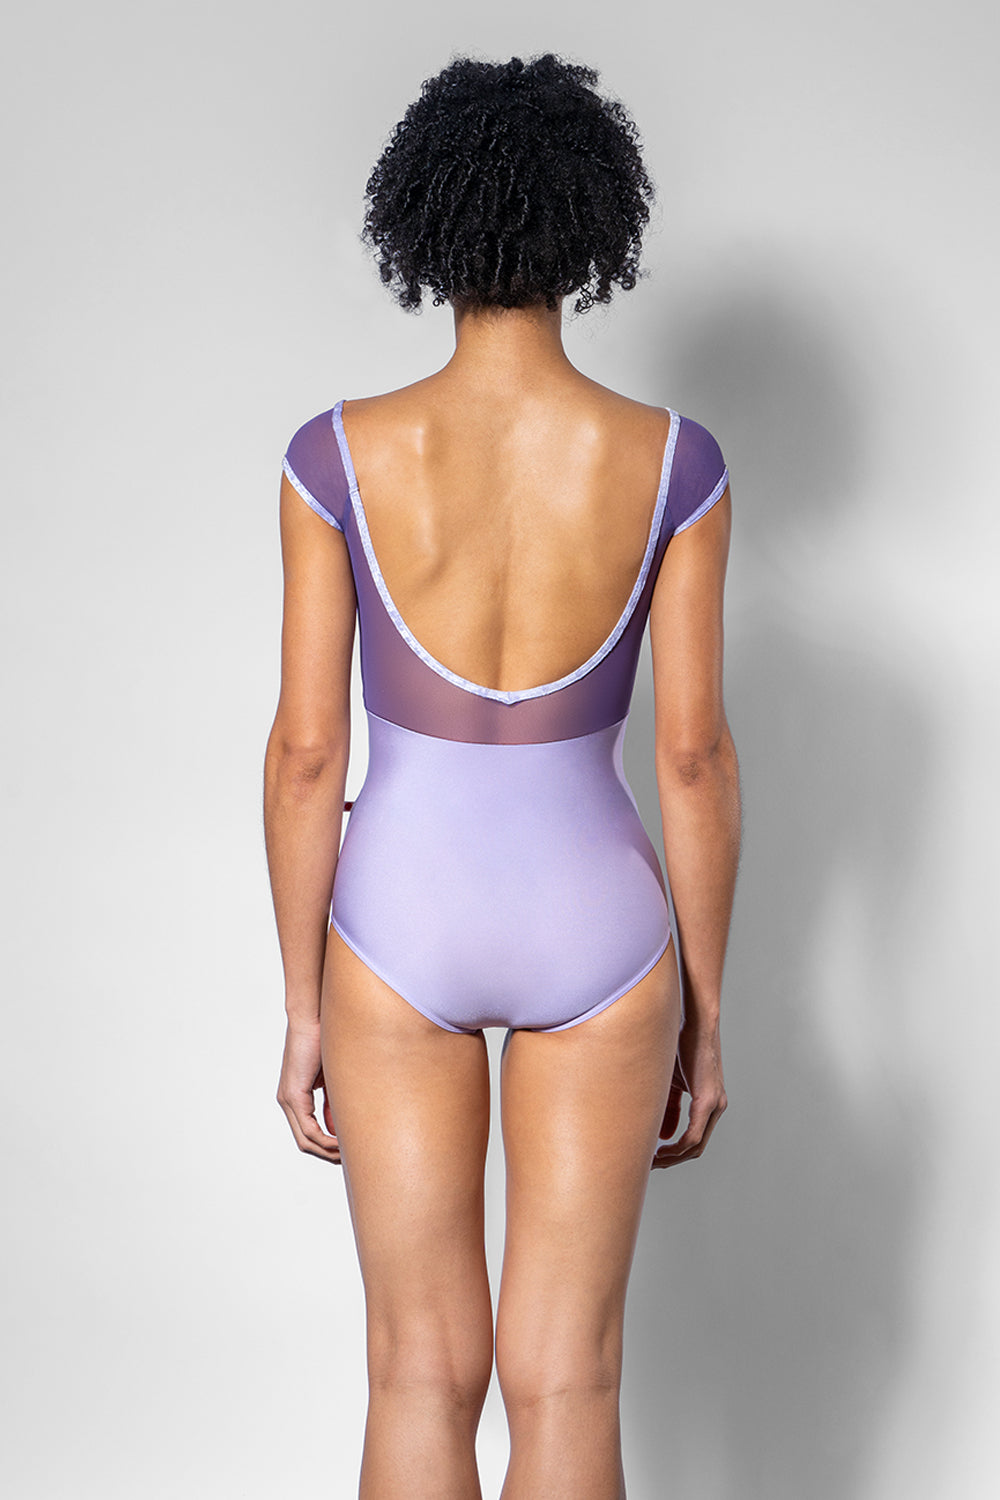 Elli leotard with N-Poem body color, N-Silver top color, Mesh Fortune back & cap sleeve color and CV-Angelic trim color